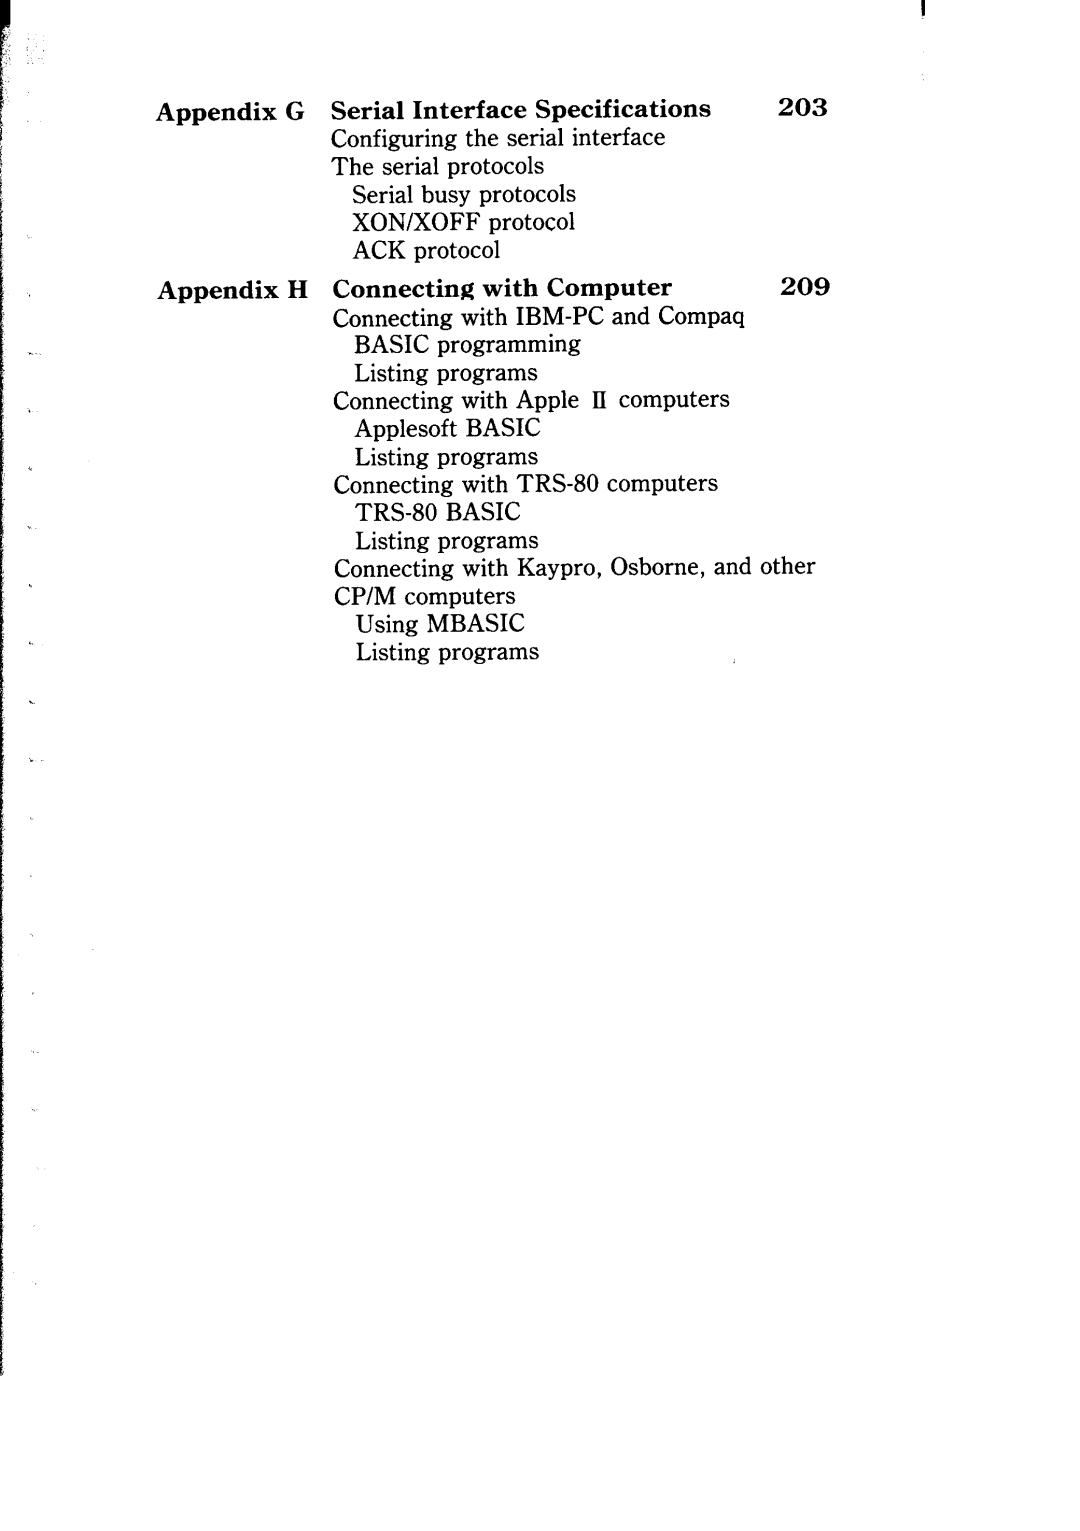 Star Micronics NB-15 user manual Appendix G Serial Interface Specifications, Appendix H Connecting with Computer 